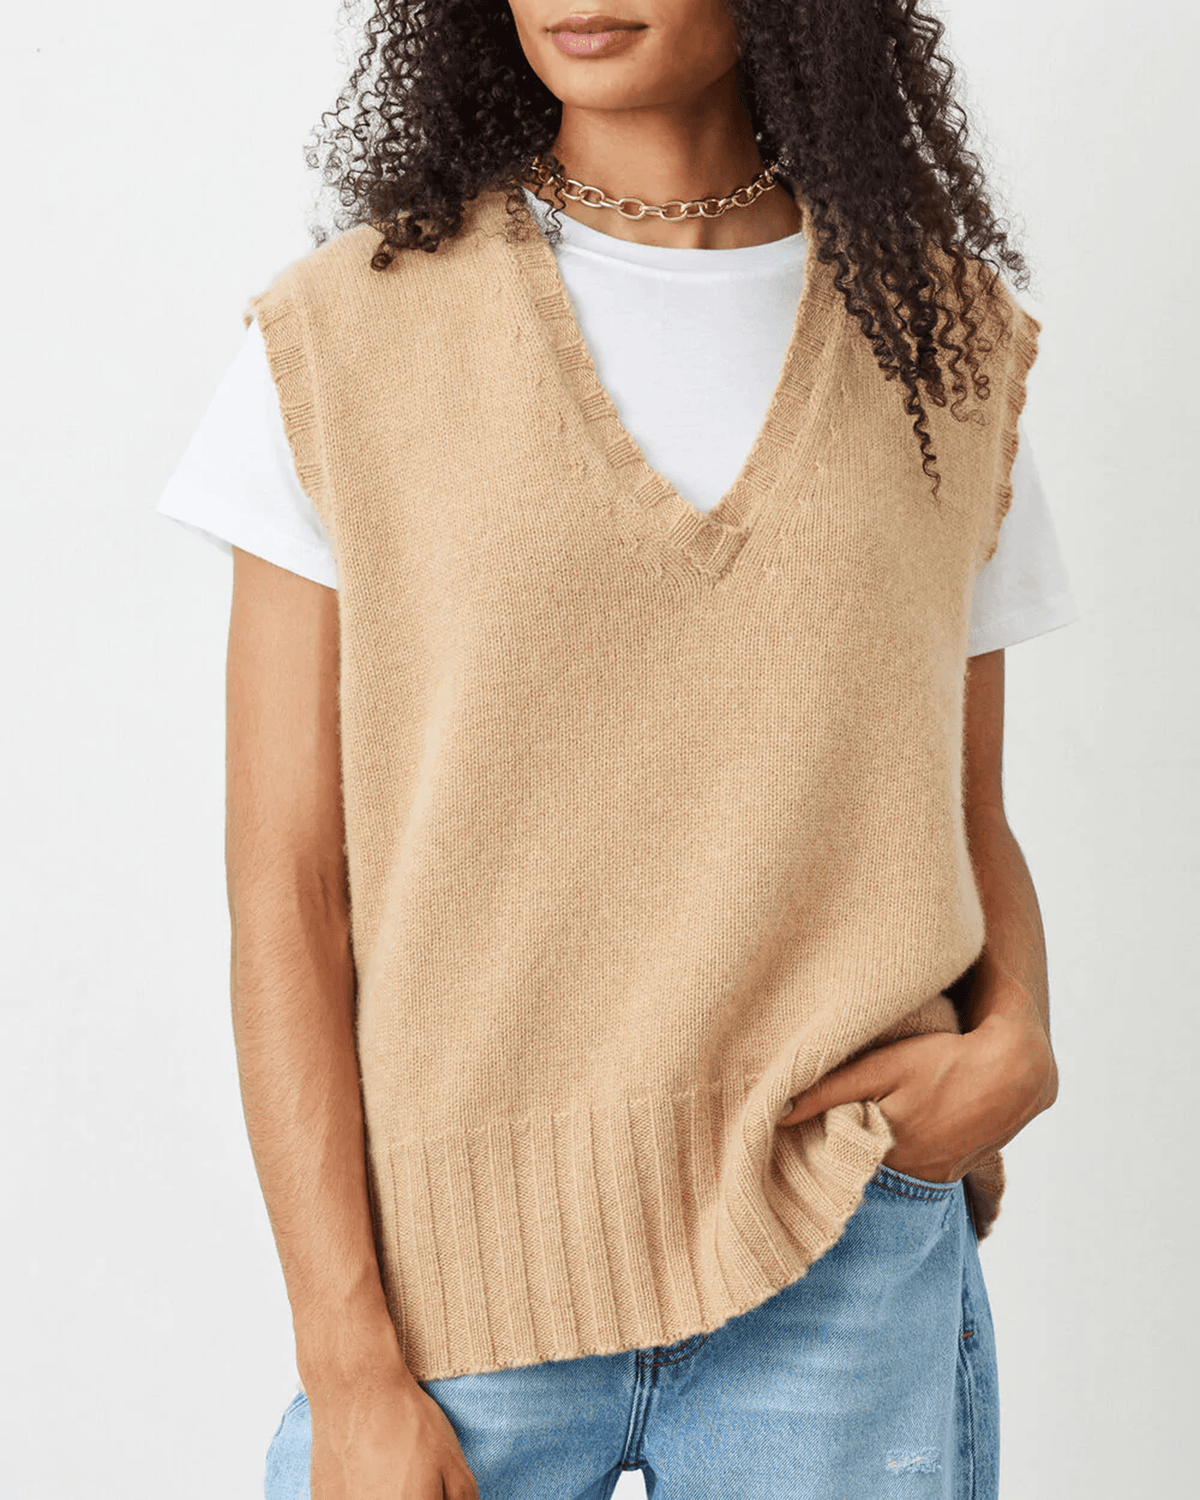 Not Monday Clothing Hannah Cashmere Vest in Camel